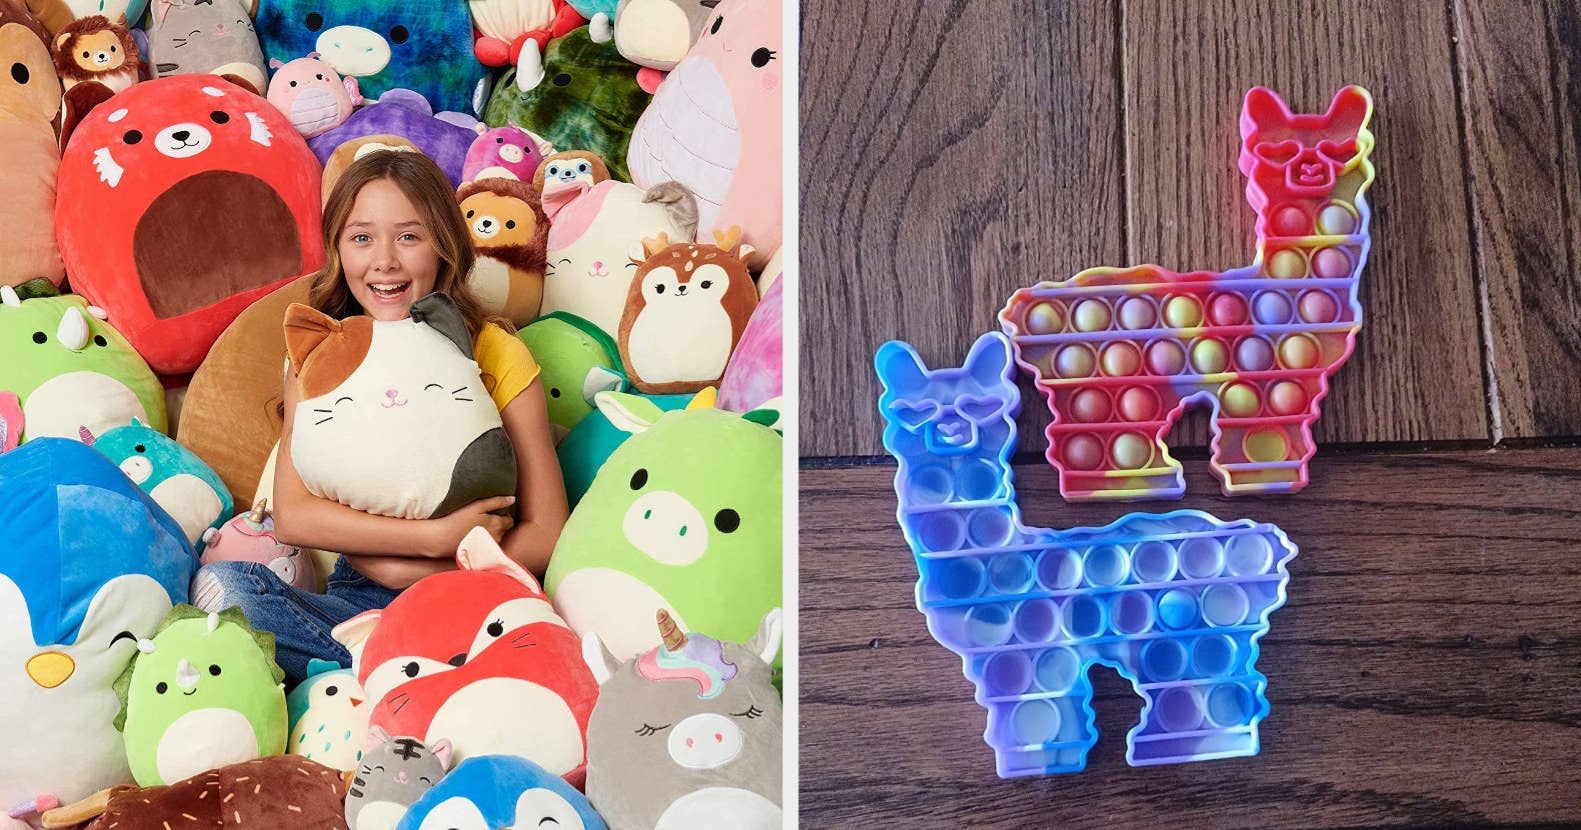 Awesome Toys & Gifts for 7 Year Olds